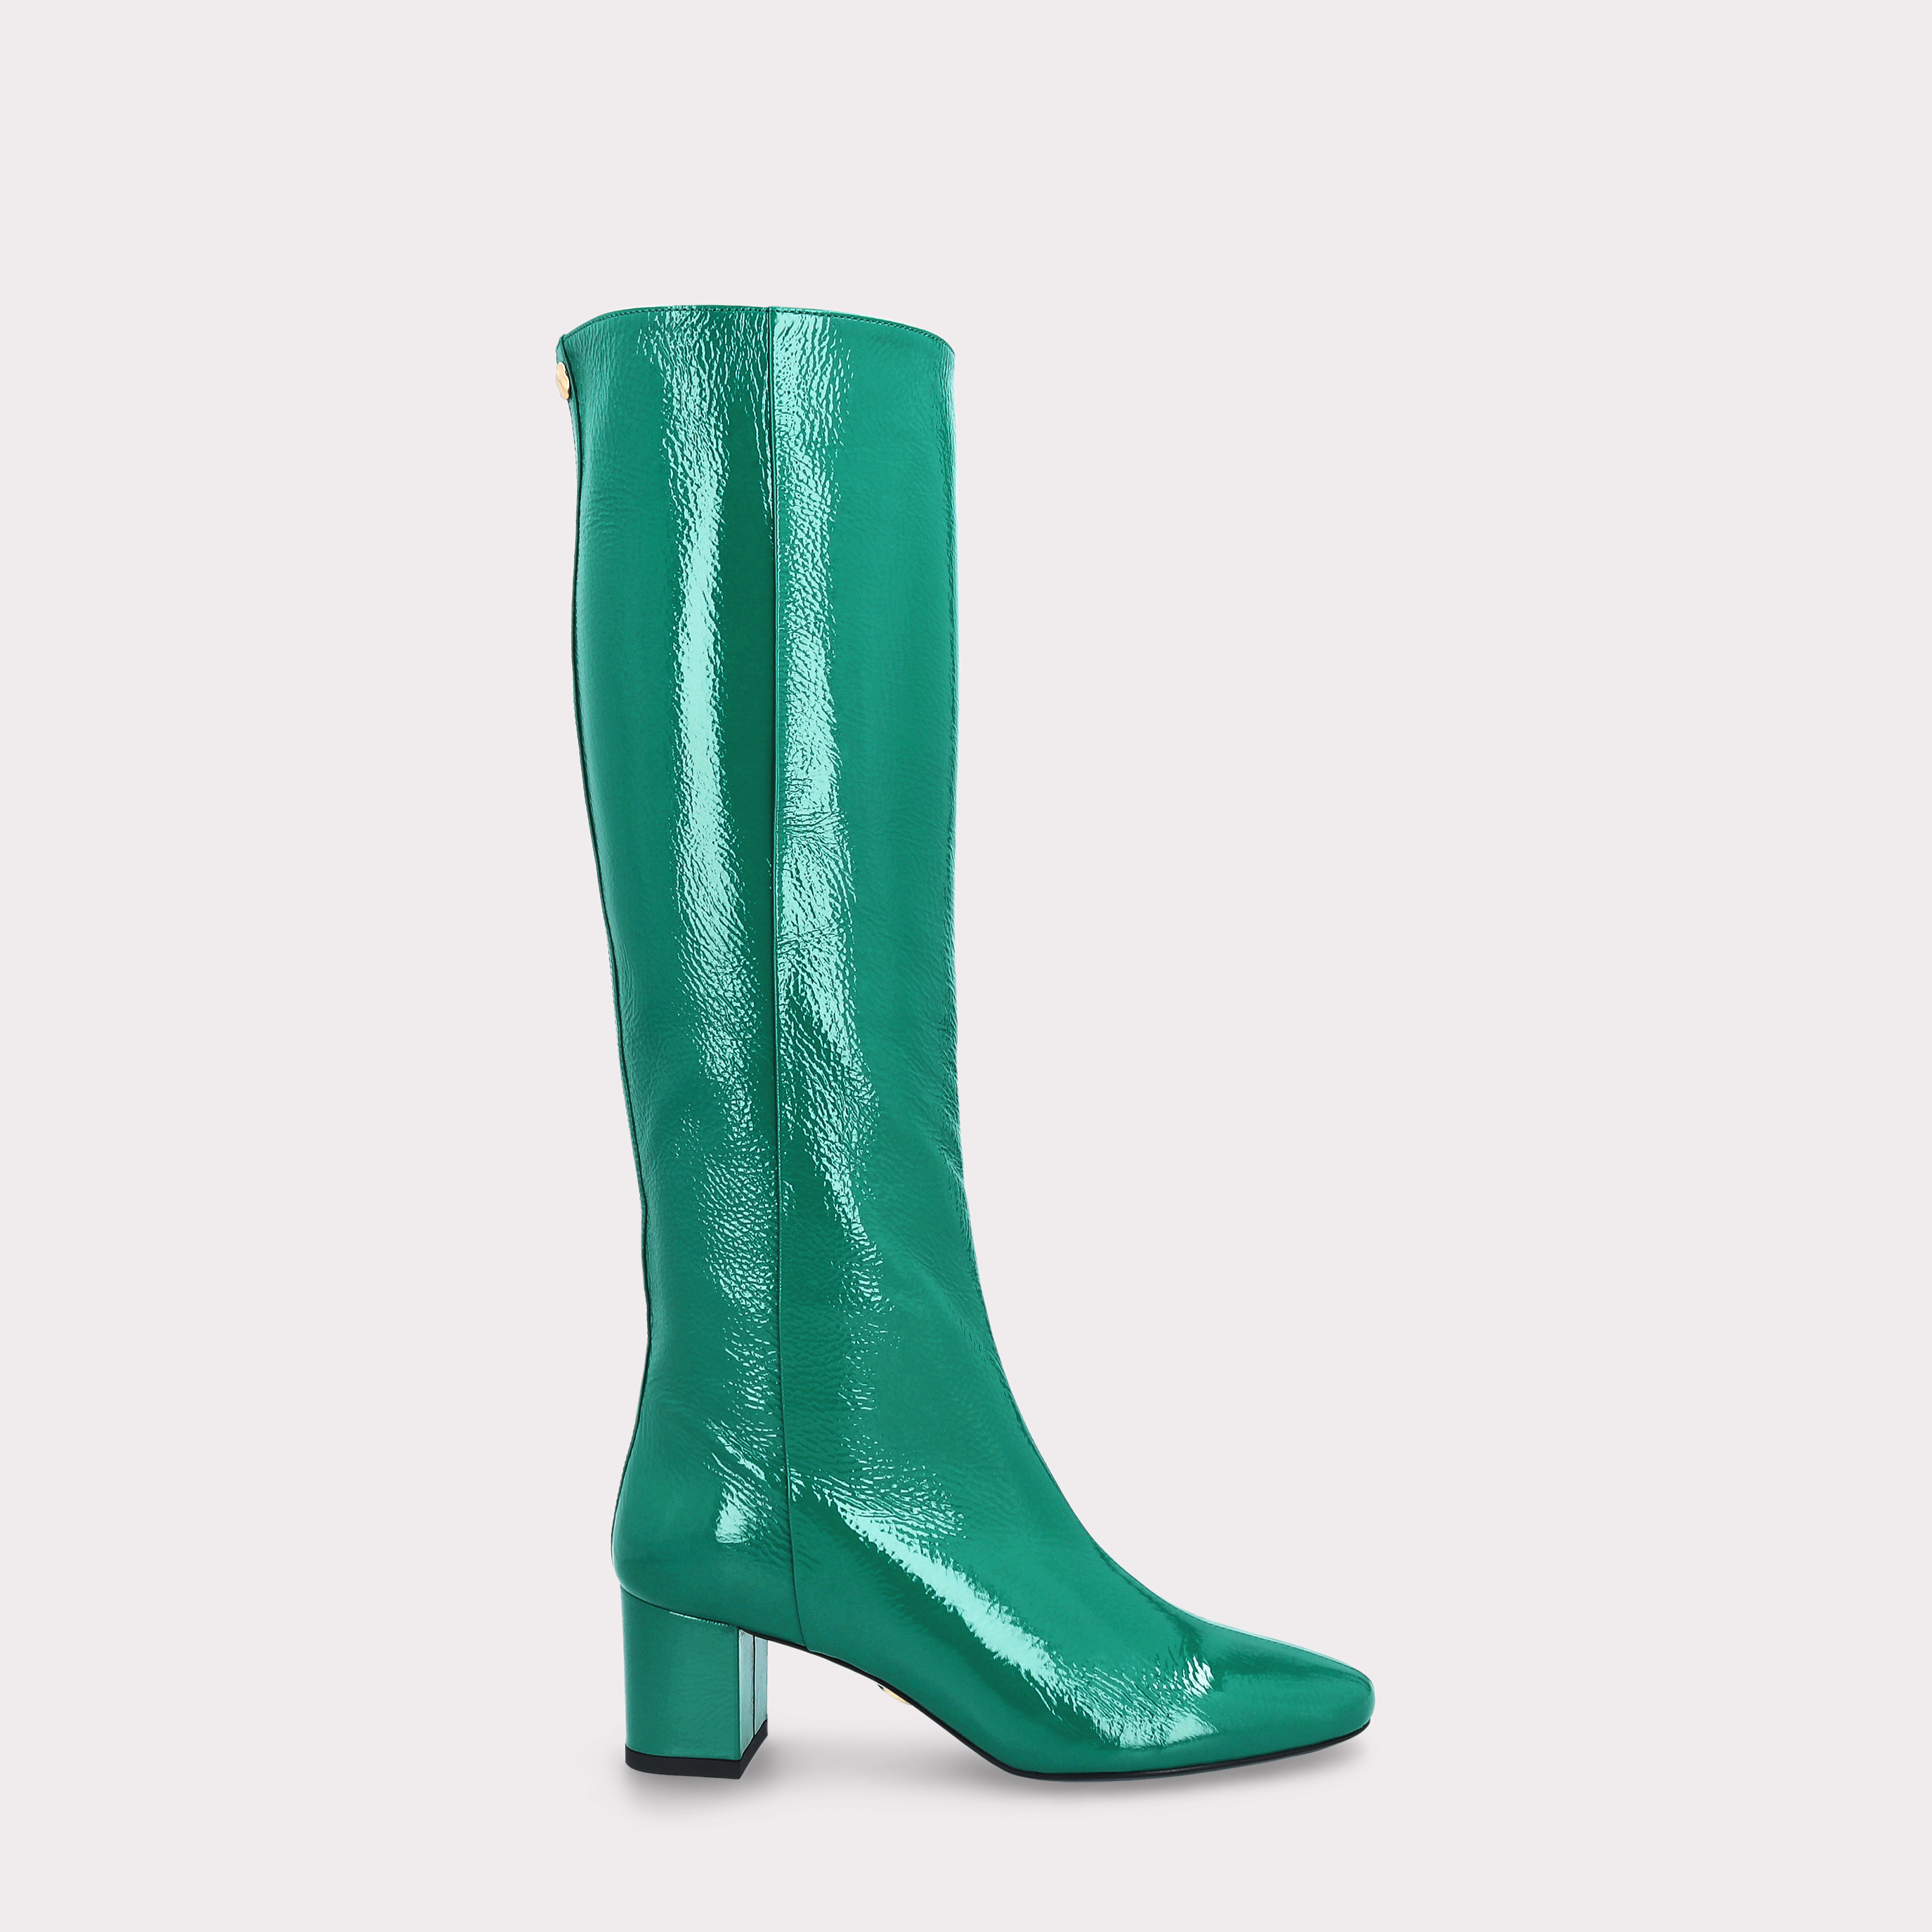 DEBBY TUBO GREEN CRUSHED PATENT LEATHER BOOTS